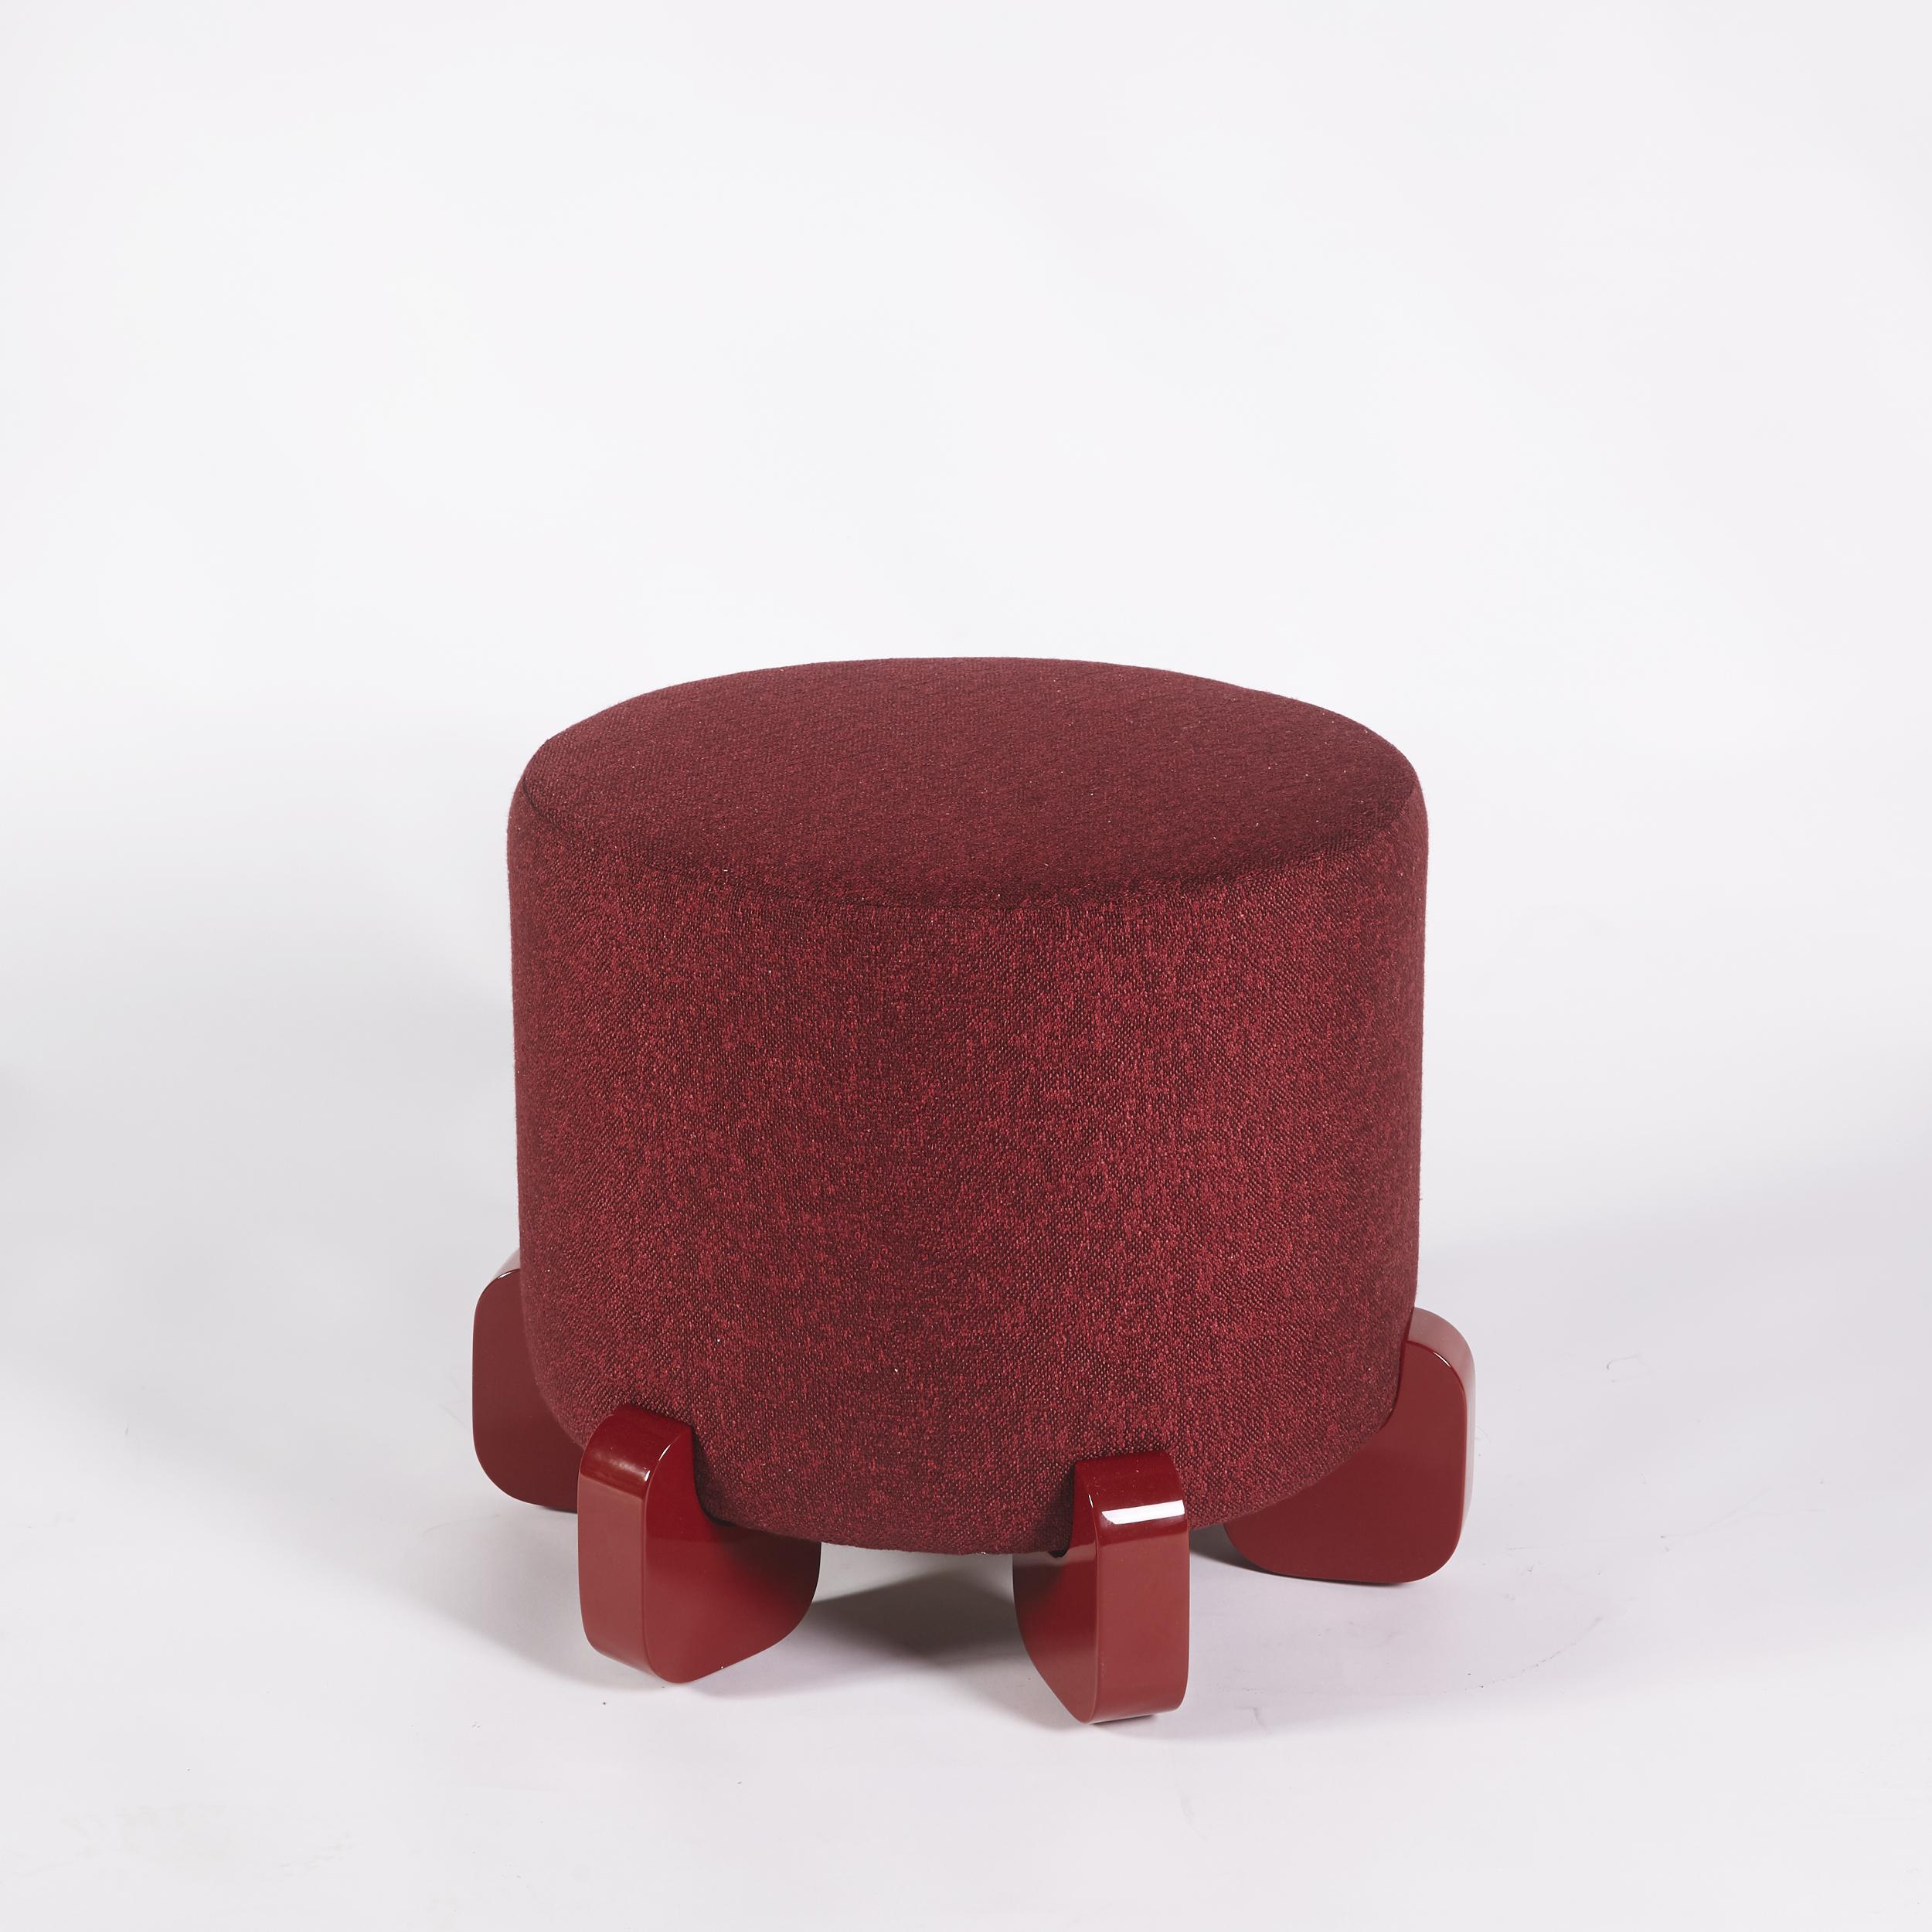 Ipanema Stool, Wood Lacquered Feet by Duistt

Following the Ipanema series that refers to the imagination of the well-known sidewalk in Rio de Janeiro. The Ipanema Stools, come in two versions upholstered in a deep red woven fabric, but with two